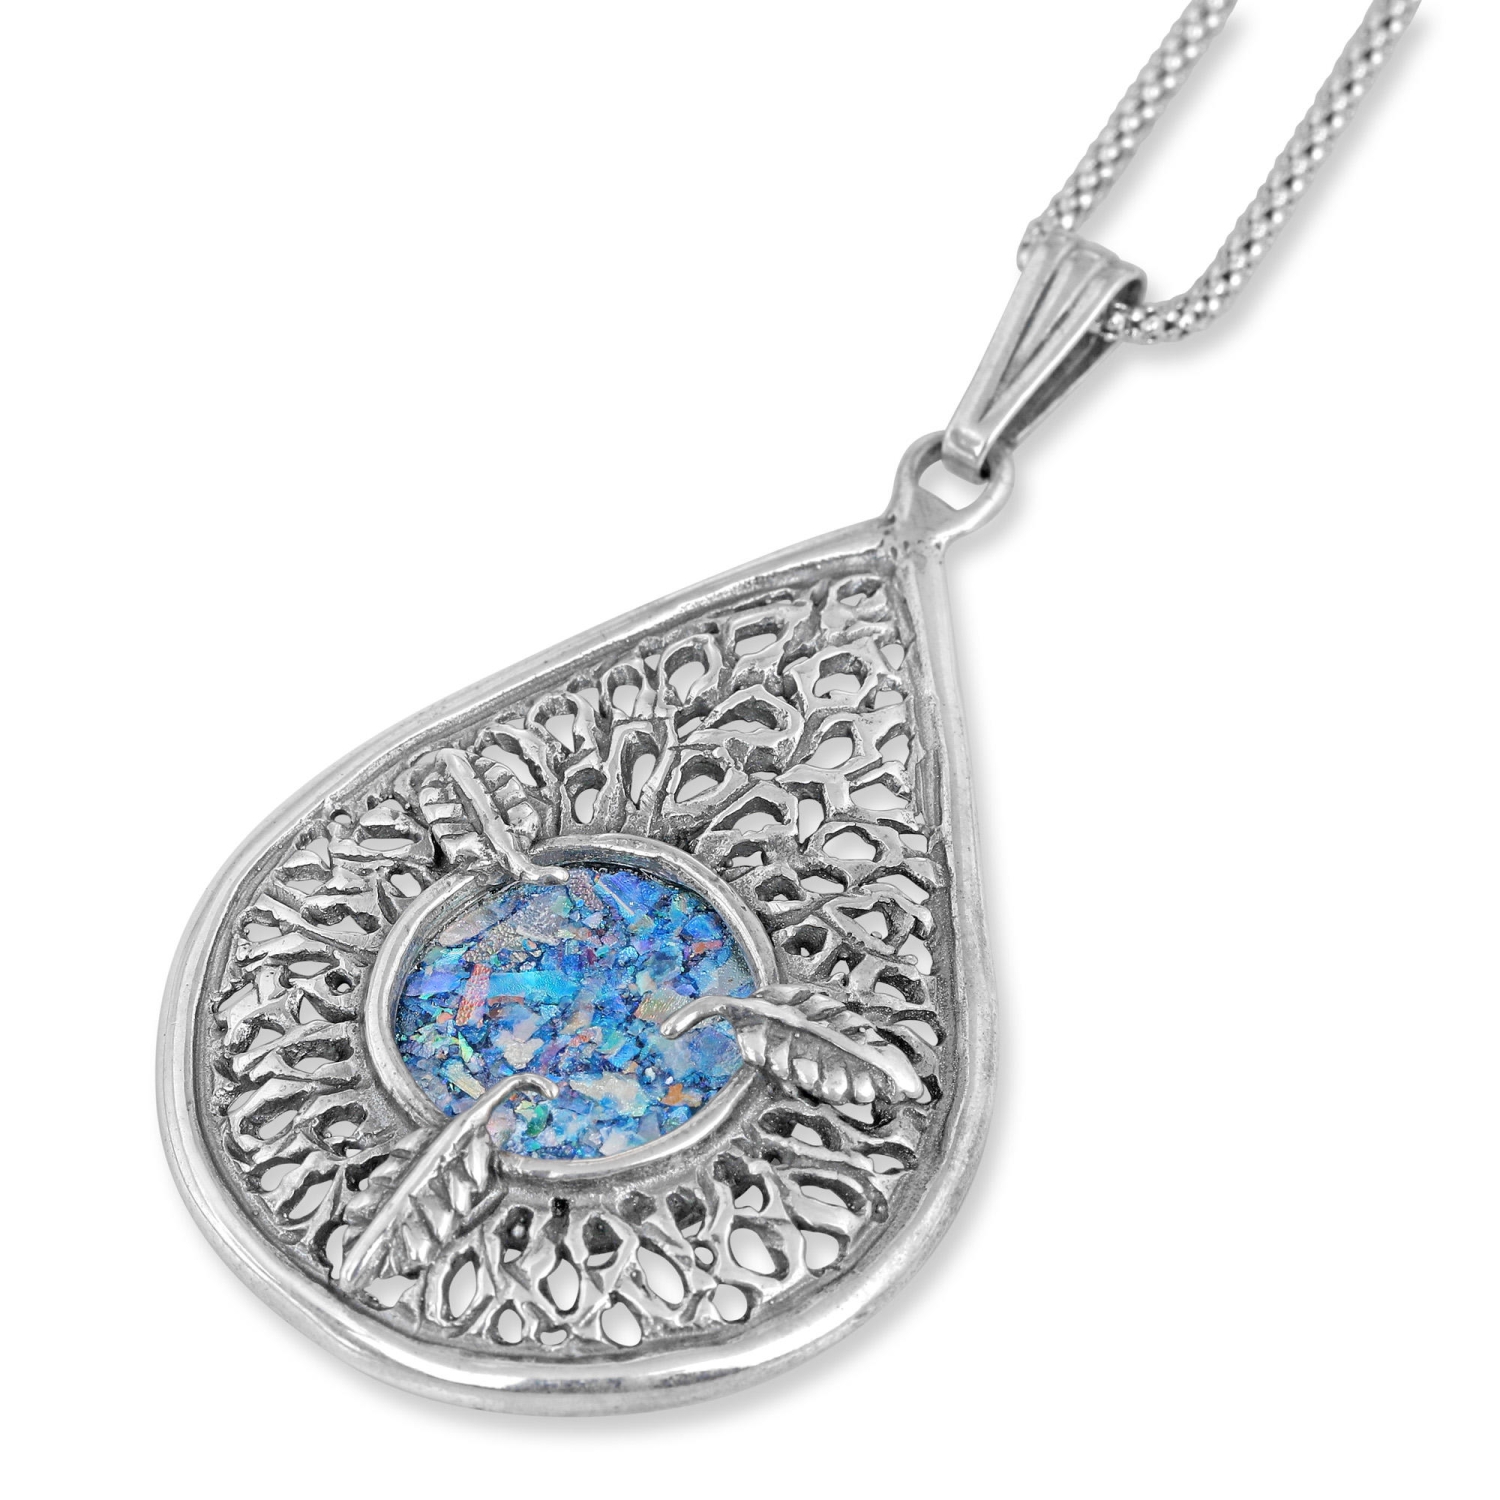 Sterling Silver and Roman Glass Teardrop Filigree Necklace with Leaf  Design - 1